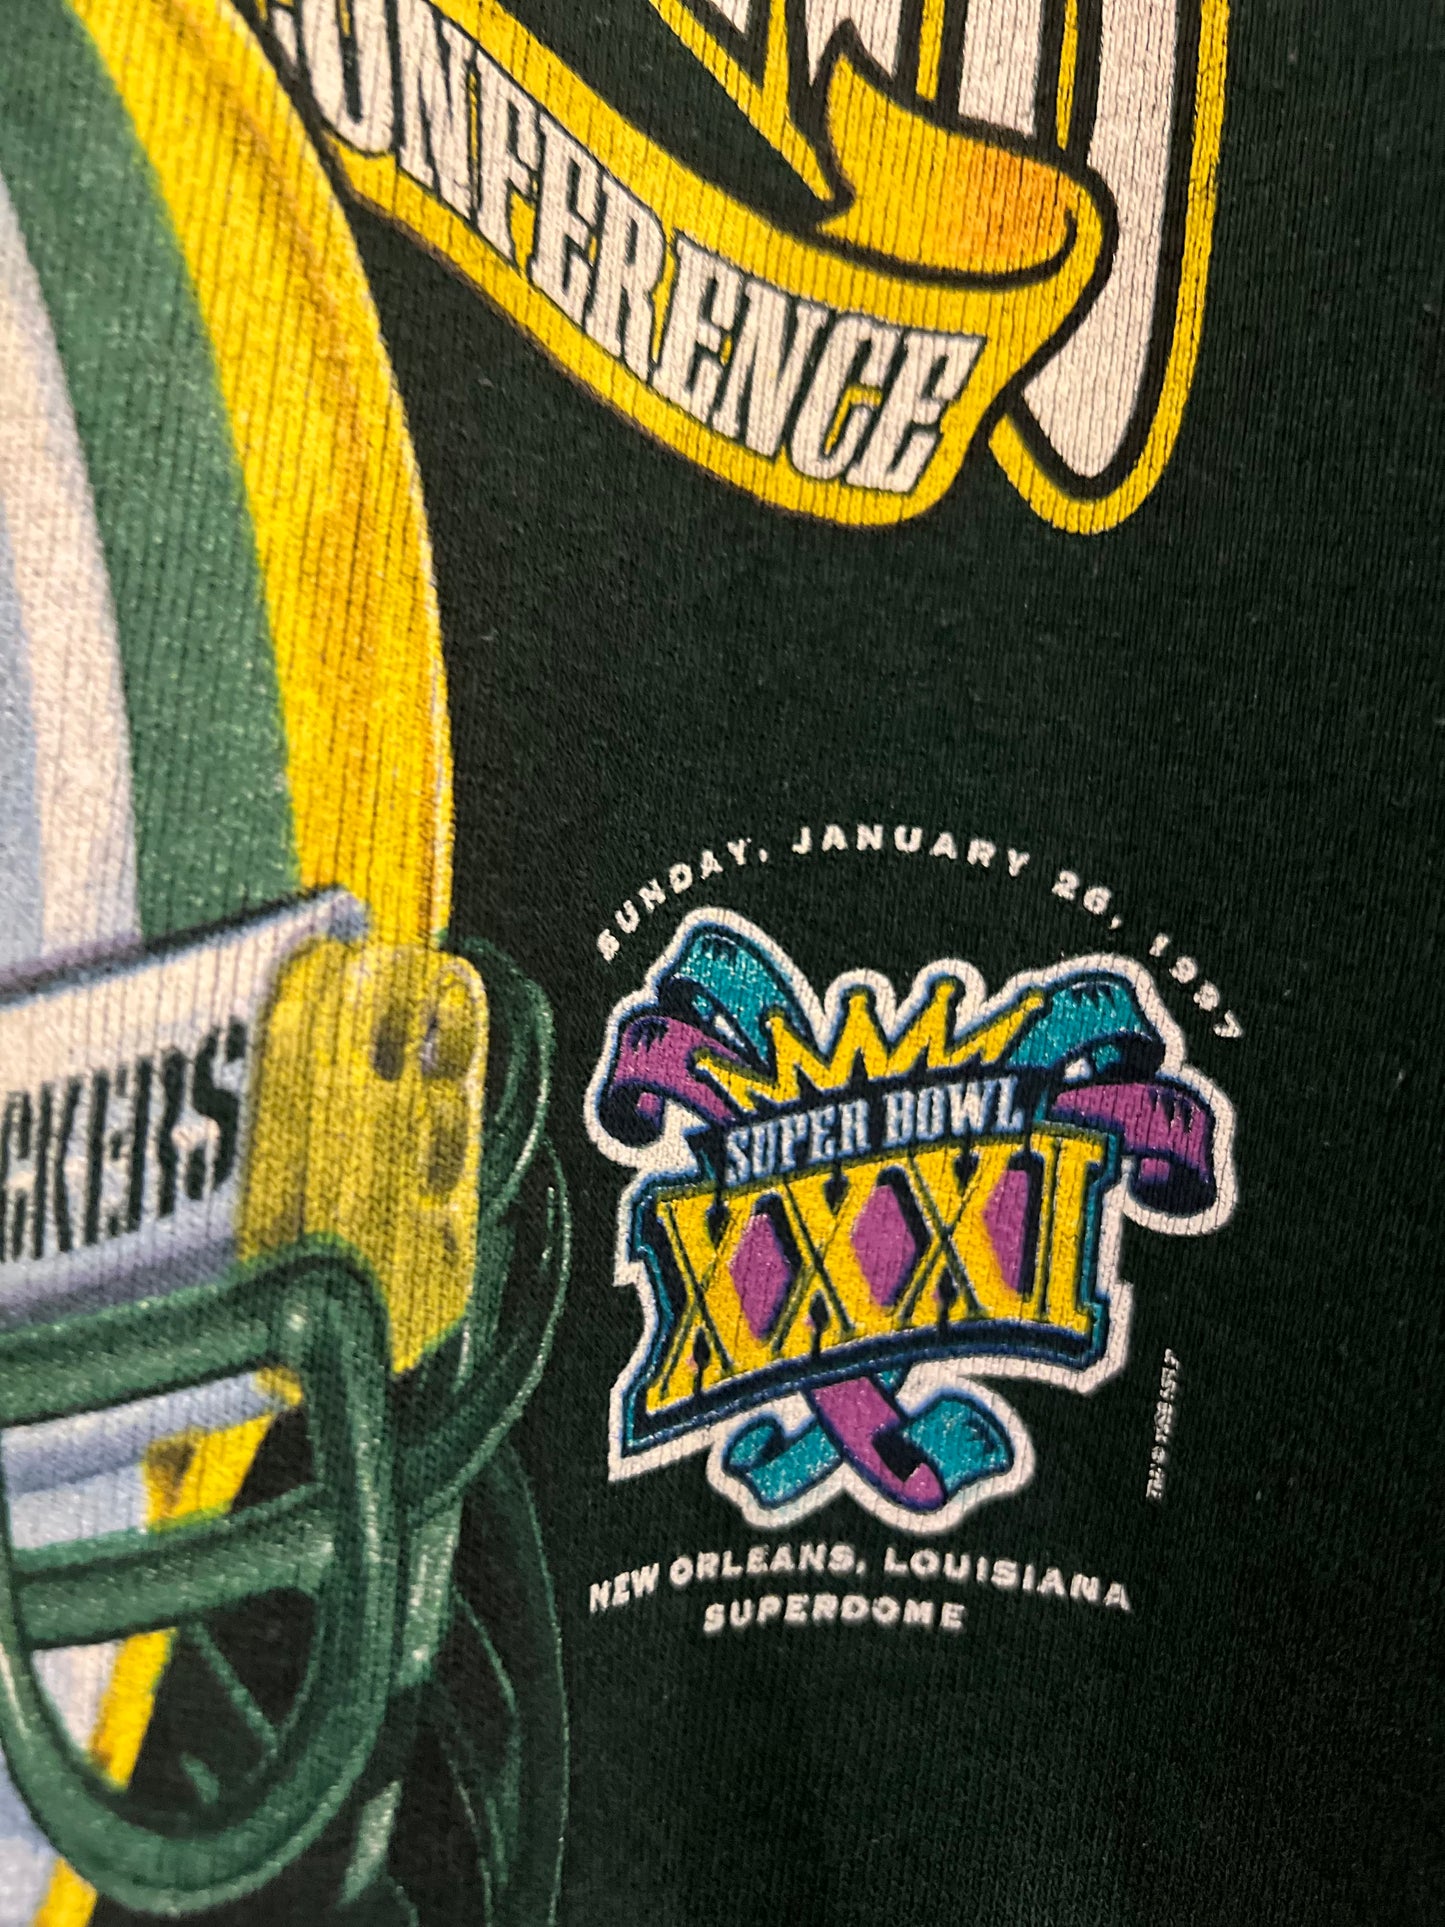 '97 Green Bay Packers Crew (2XL)